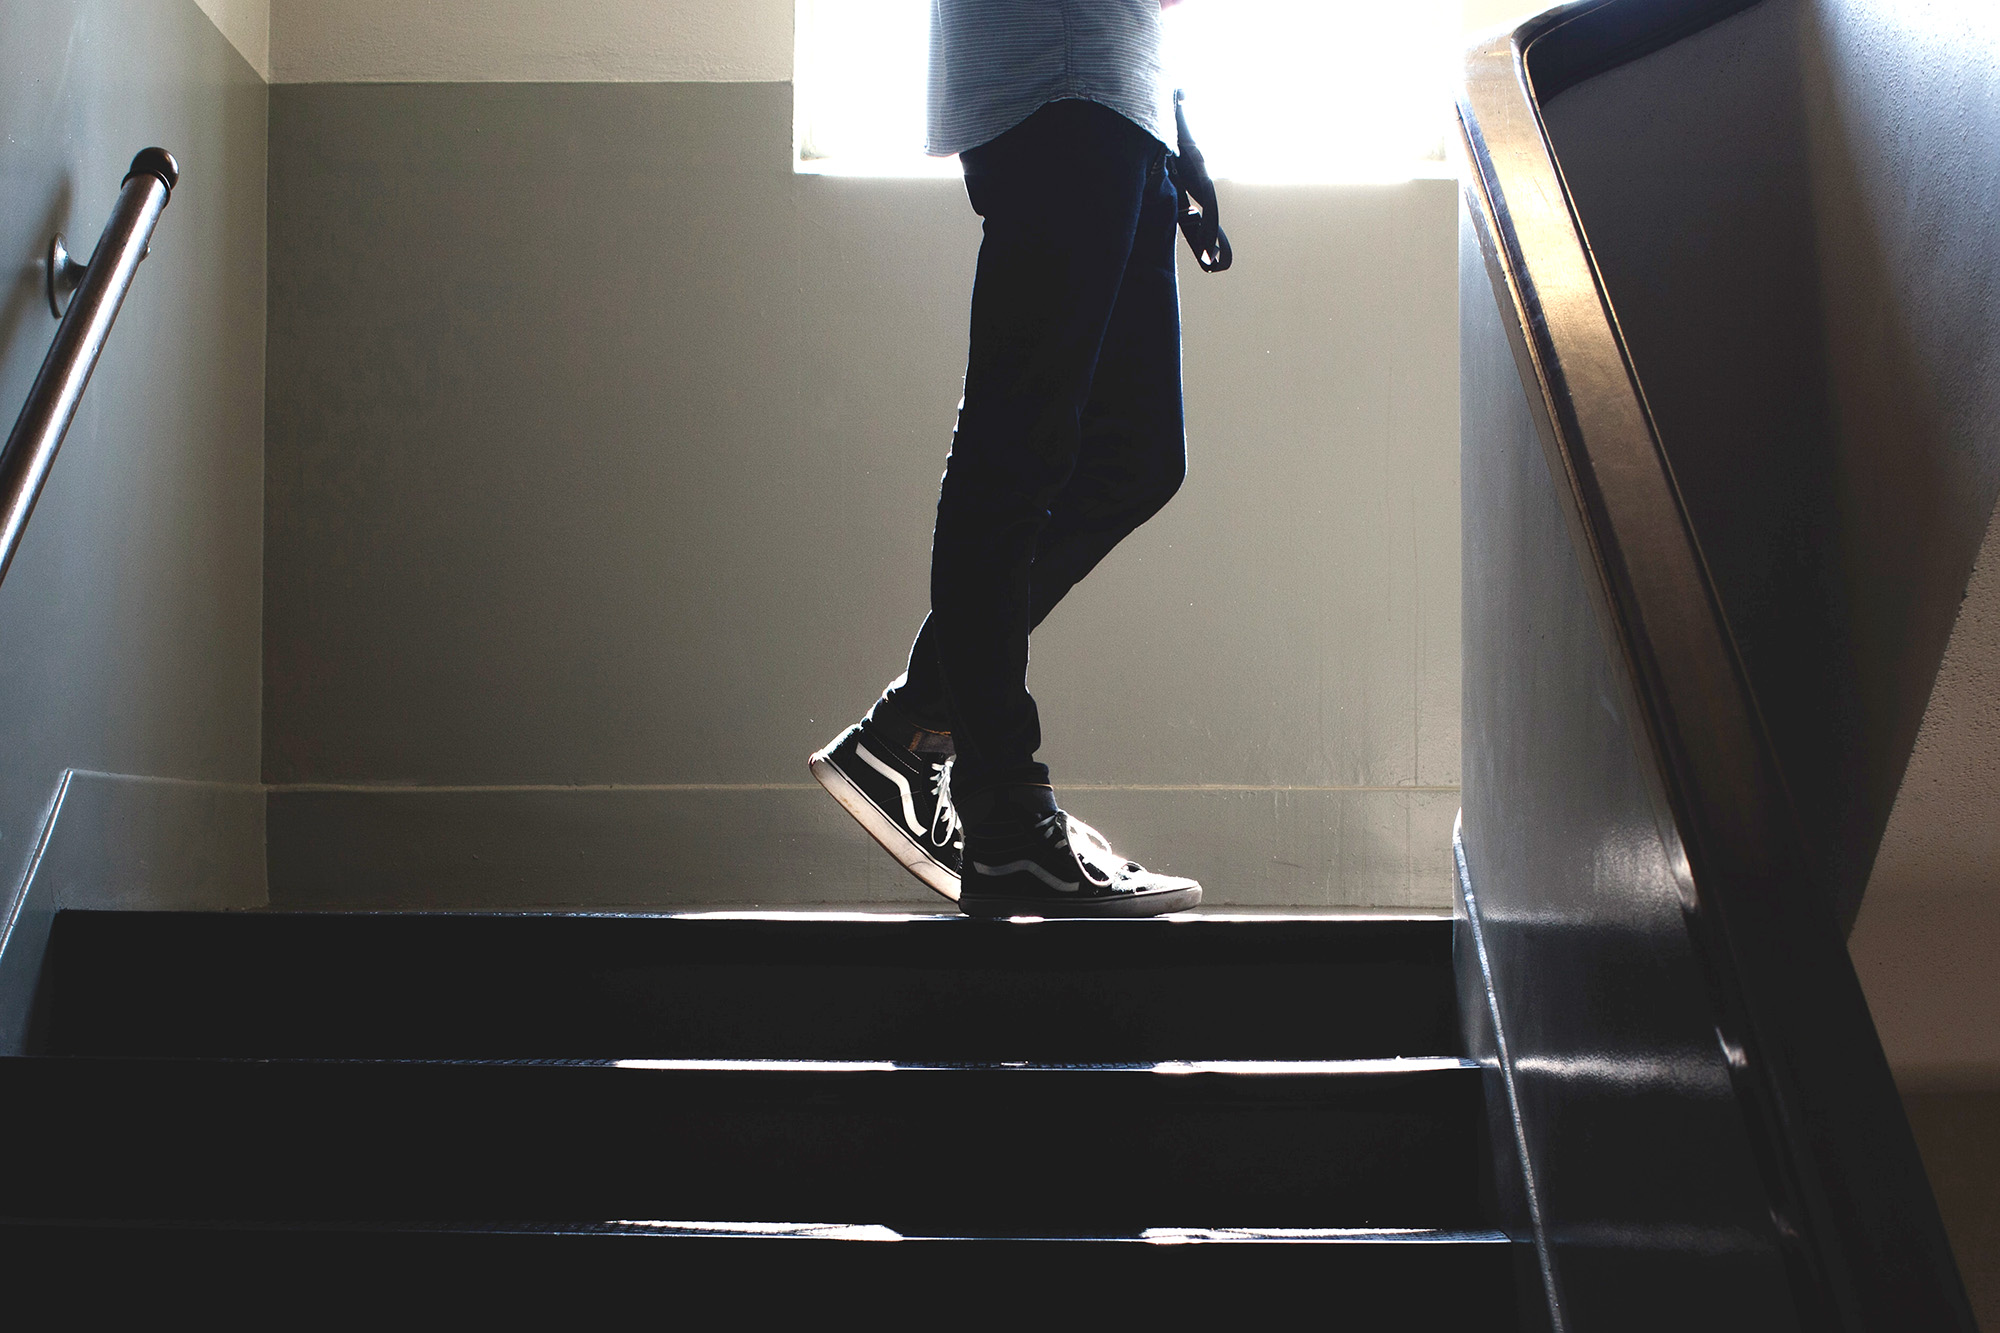 Silhouette of student on stairs at school